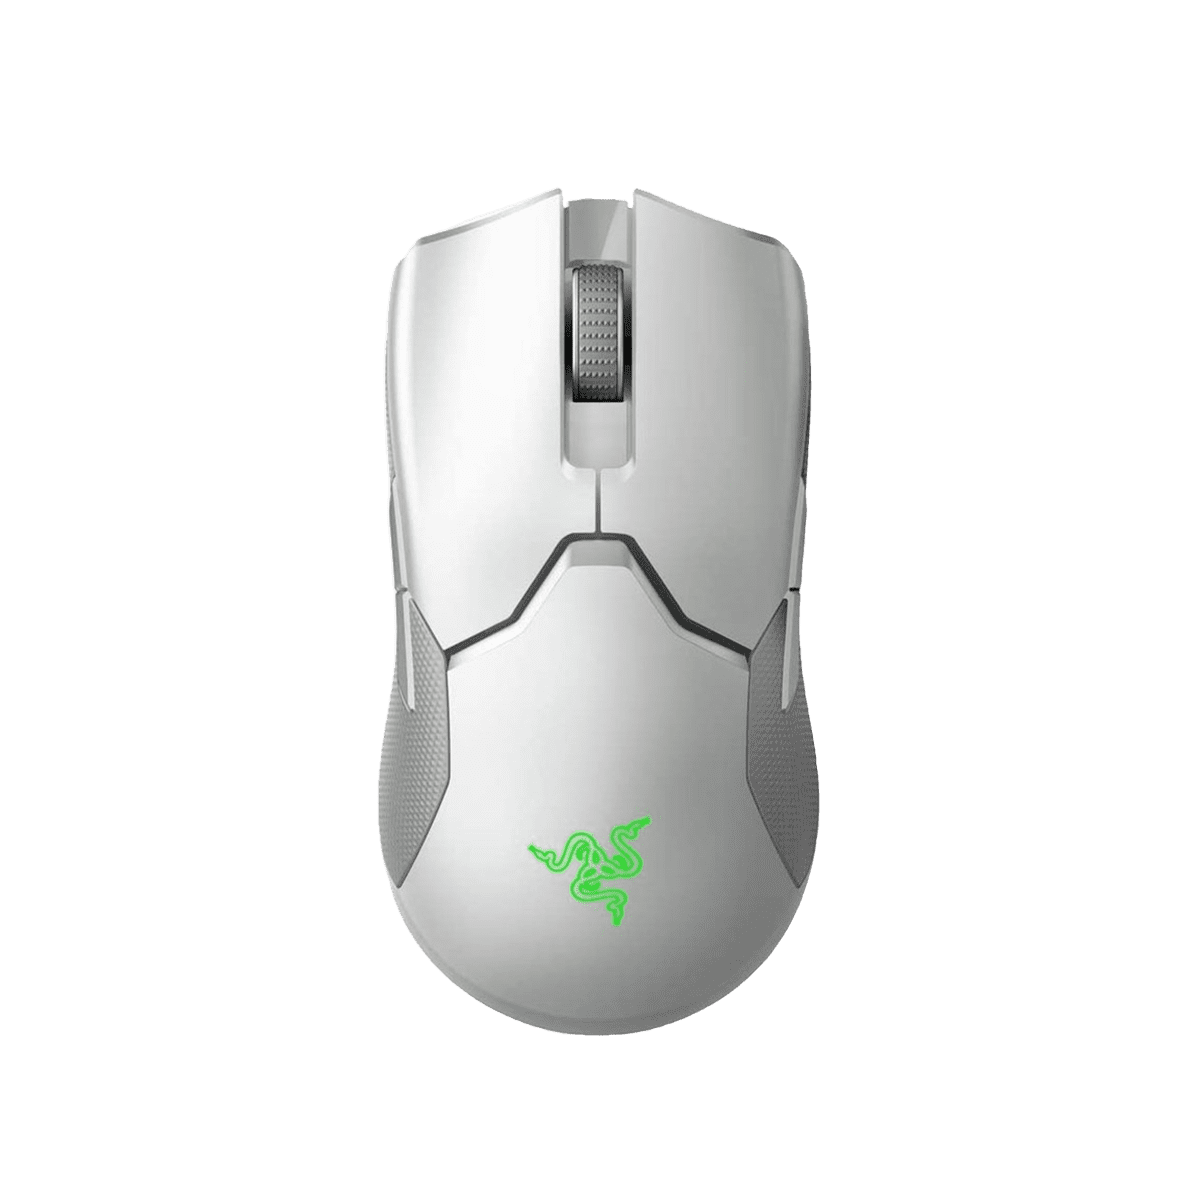 Dimprice Razer Viper Ultimate Wireless Gaming Mouse With Dock Mercury